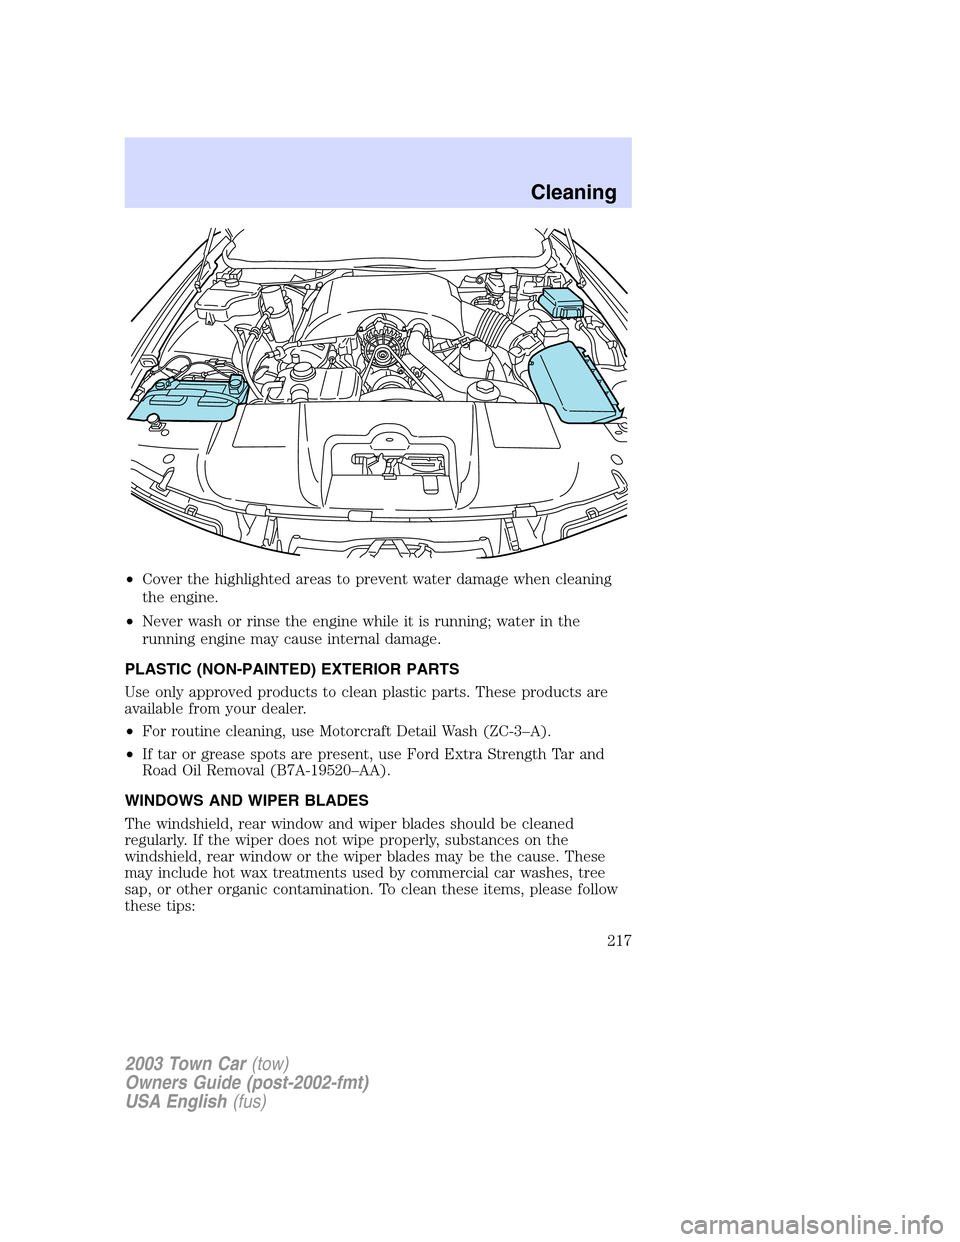 LINCOLN TOWN CAR 2003  Owners Manual •Cover the highlighted areas to prevent water damage when cleaning
the engine.
•Never wash or rinse the engine while it is running; water in the
running engine may cause internal damage.
PLASTIC (